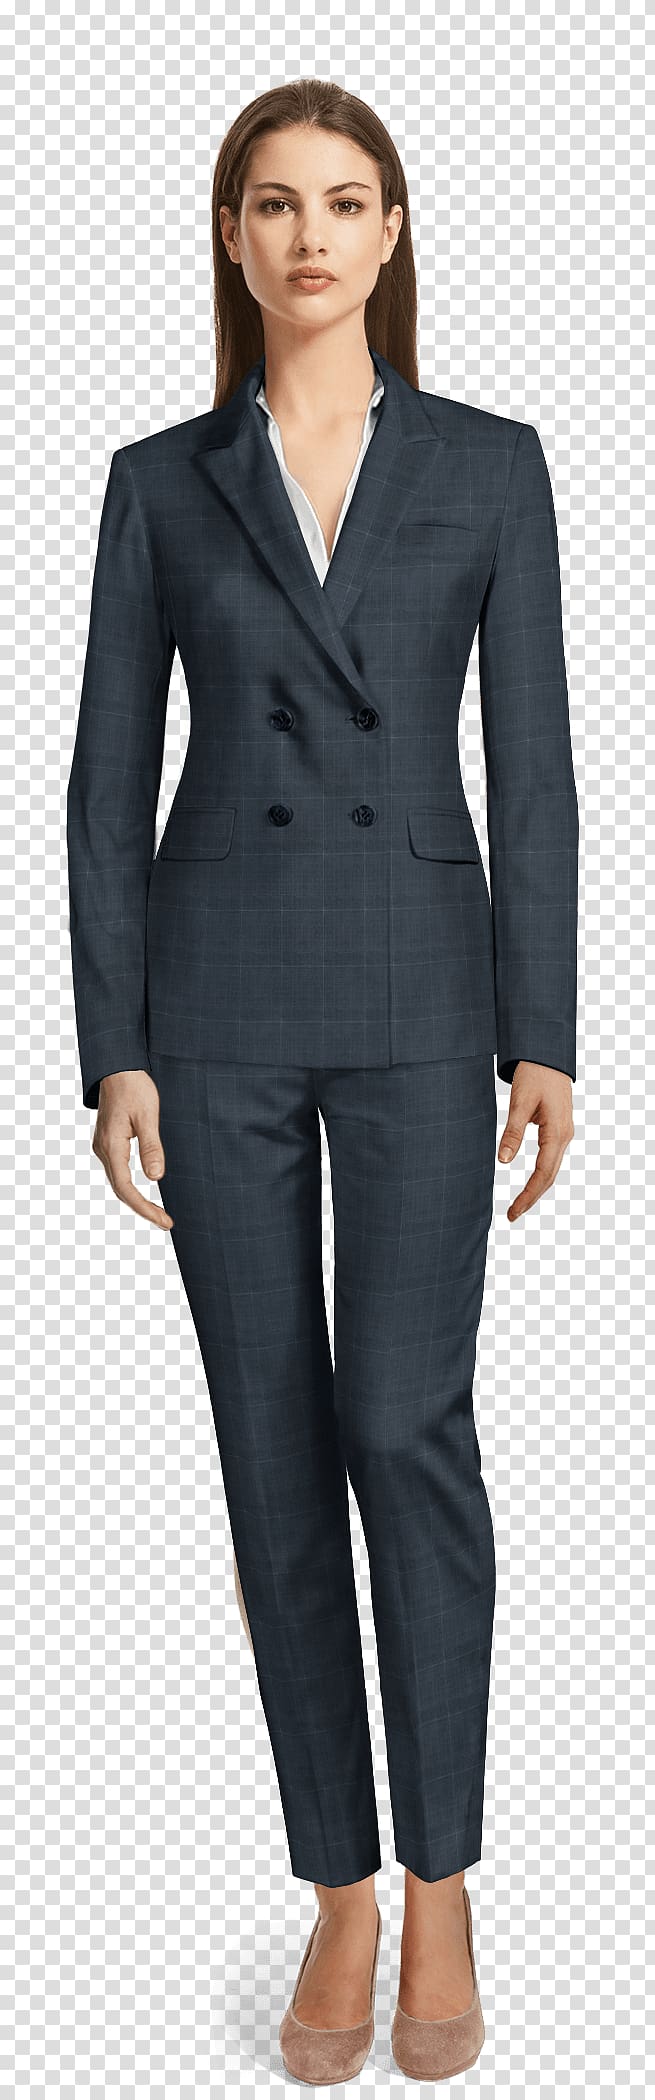 Pant Suits Double-breasted Clothing Blazer, female suit transparent background PNG clipart